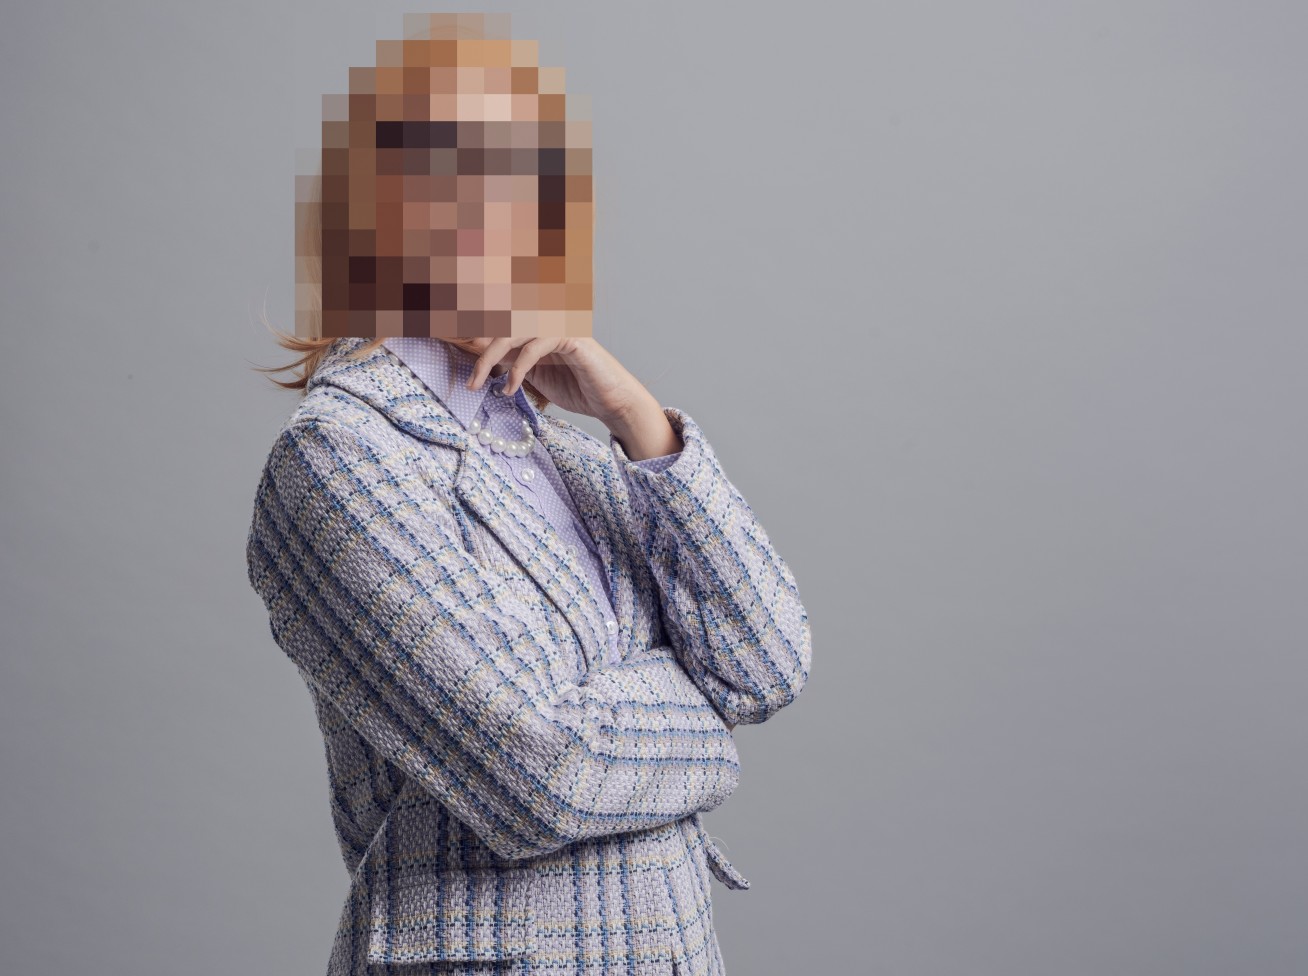 Image of a person with their face pixelated.